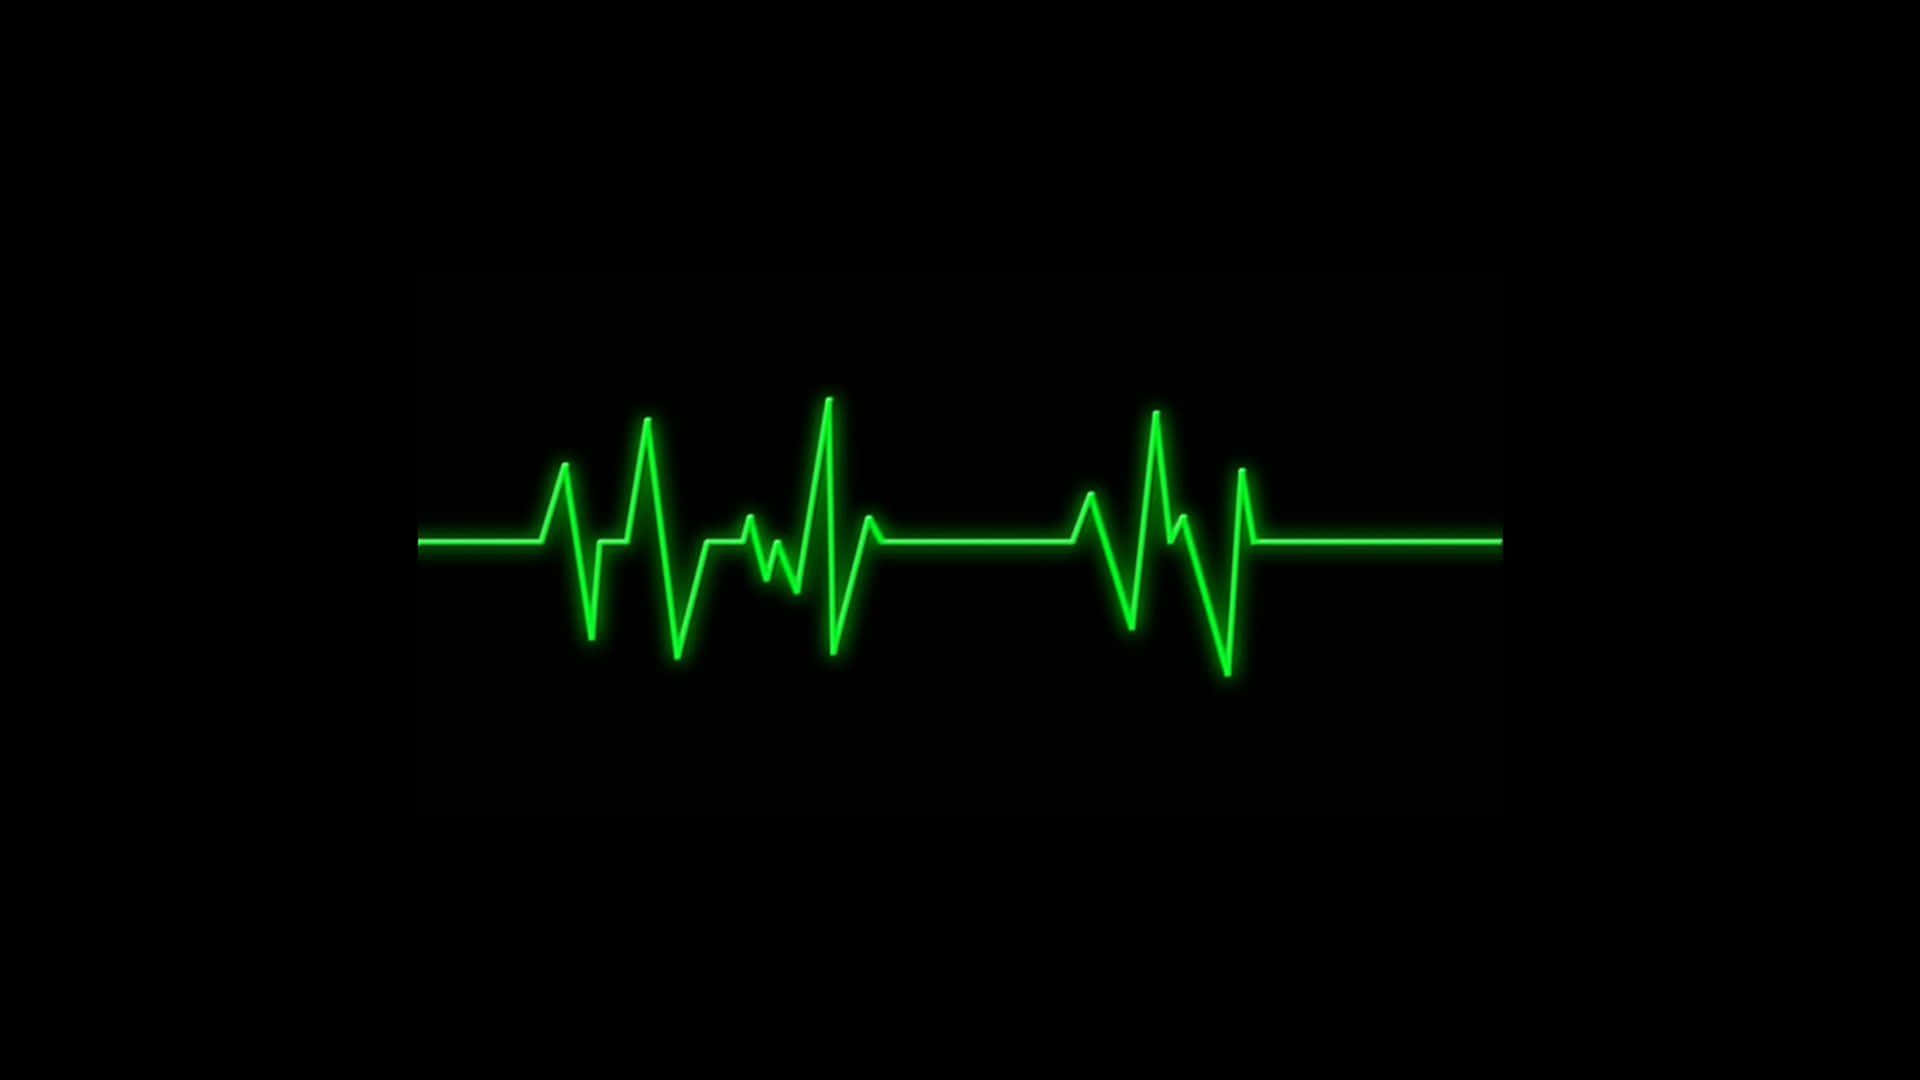 Maintaining a Healthy Heart Rate" Wallpaper